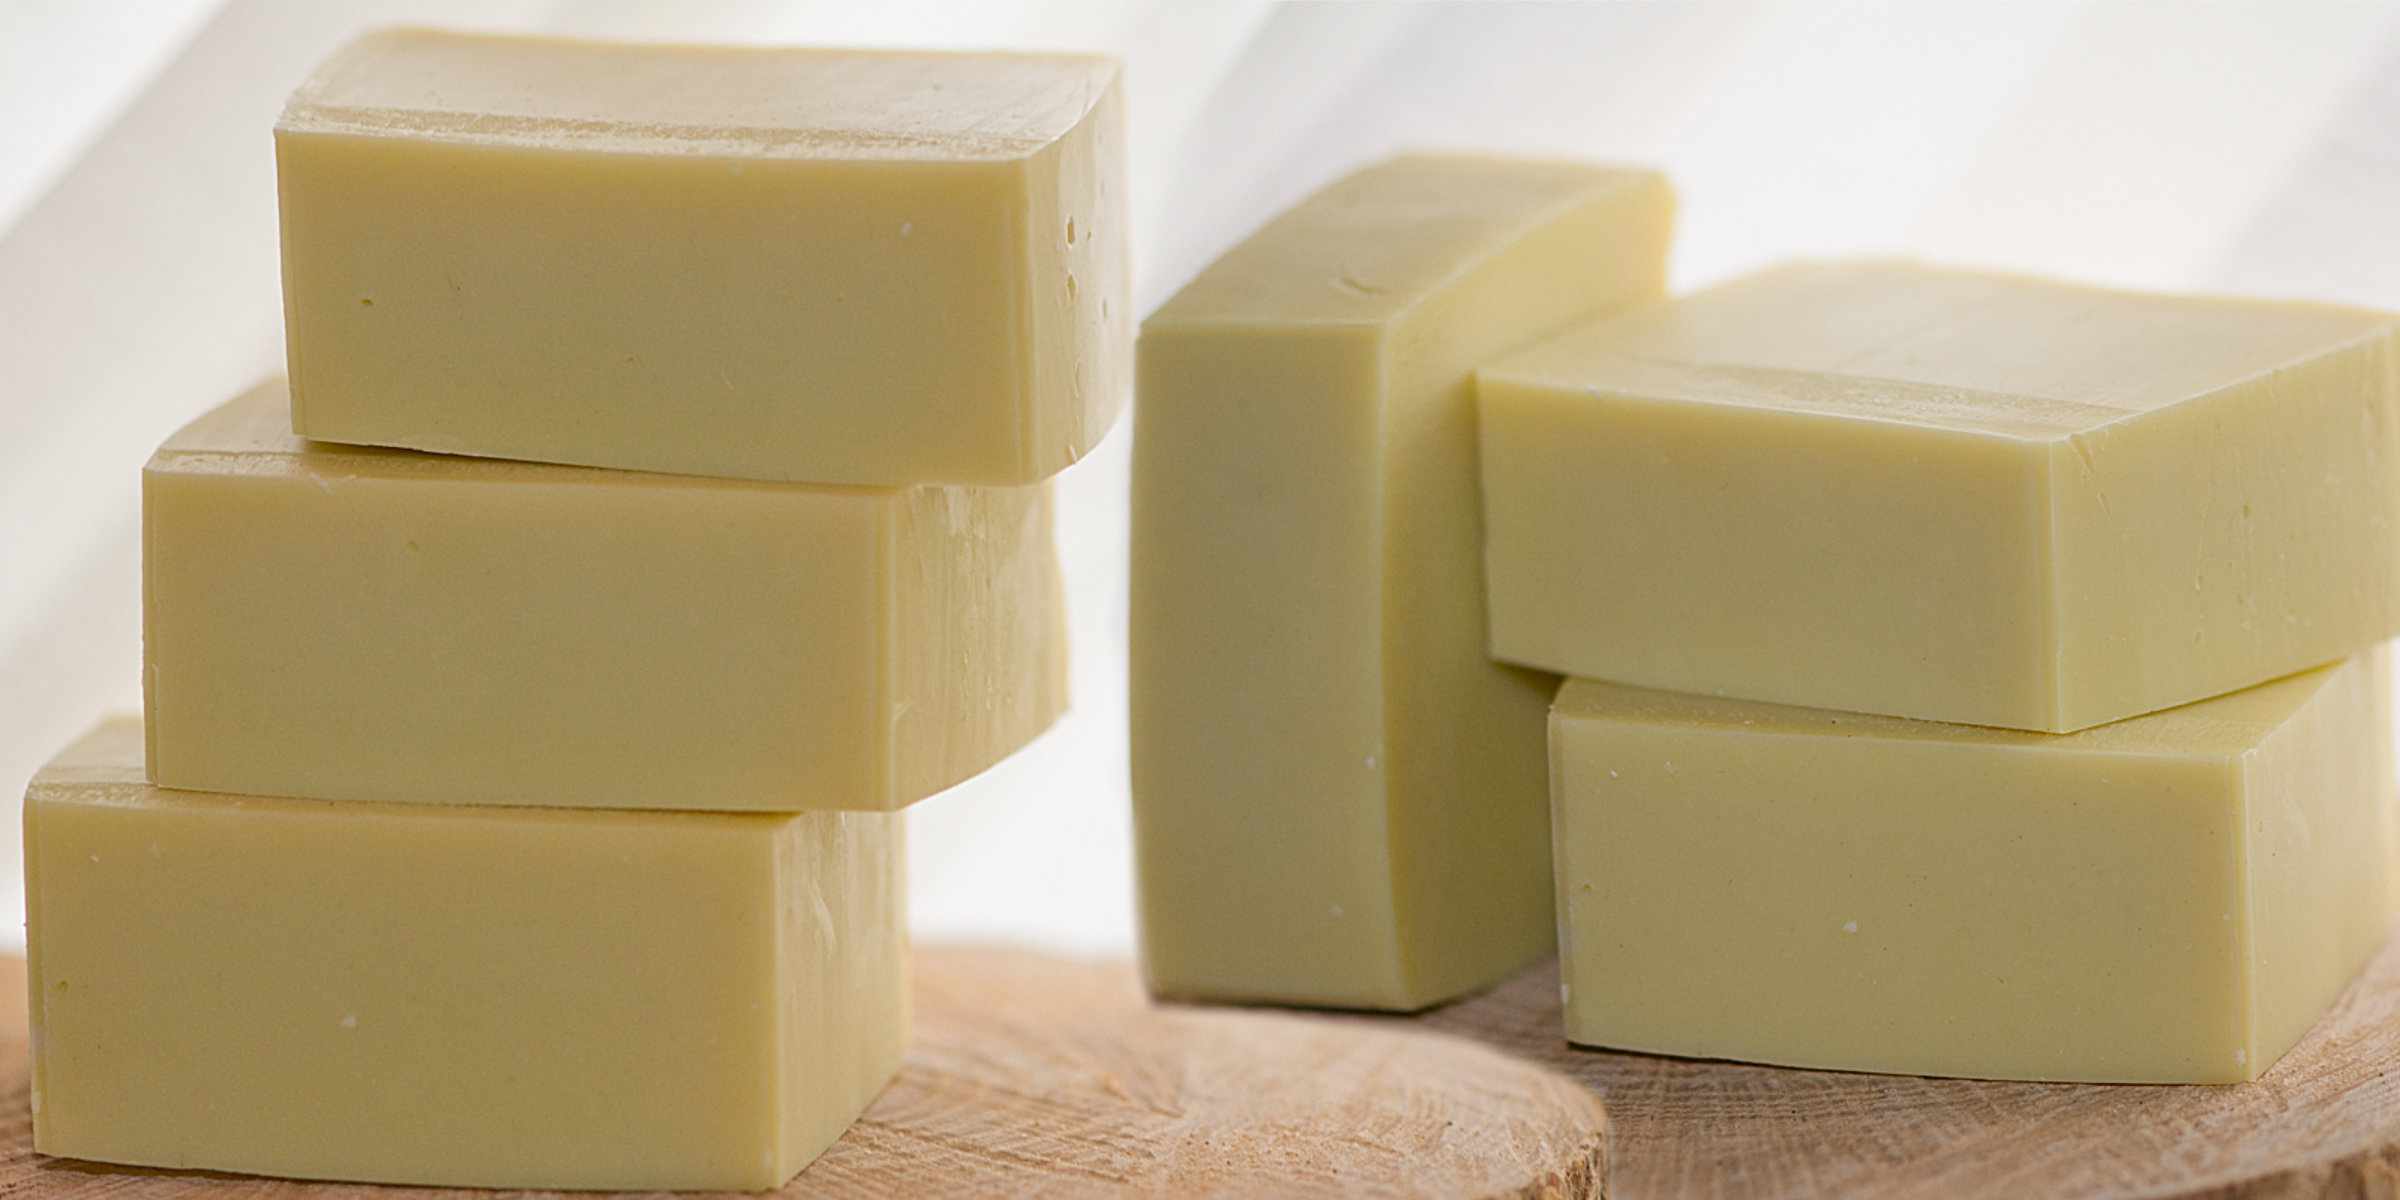 Difference Between Castile and Bastille Soap